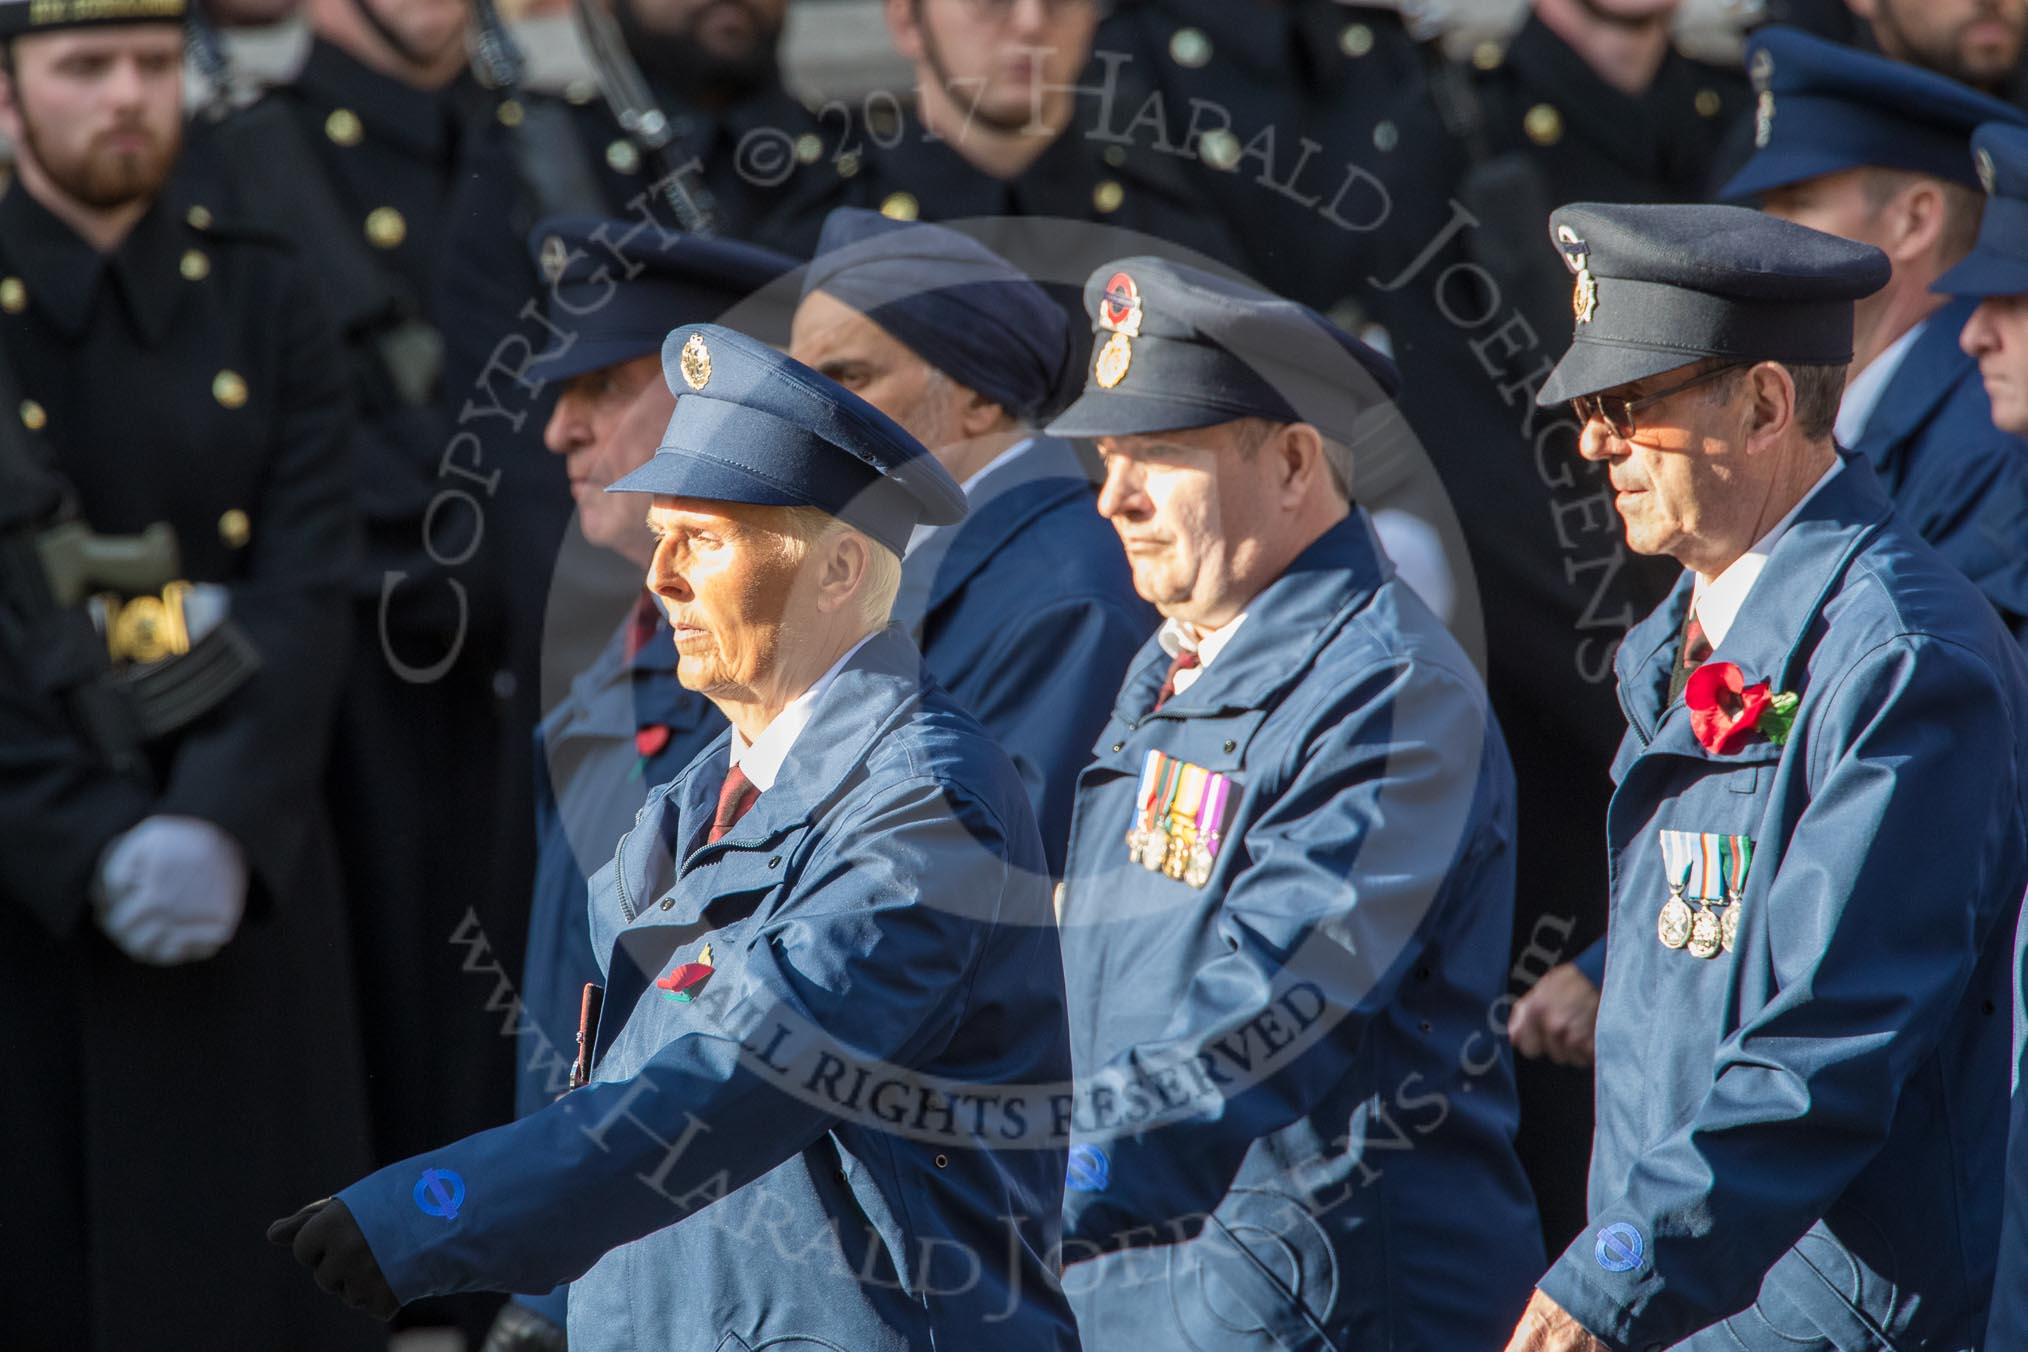 Transport for London, TFL (Group M1, 41 members) during the Royal British Legion March Past on Remembrance Sunday at the Cenotaph, Whitehall, Westminster, London, 11 November 2018, 12:25.